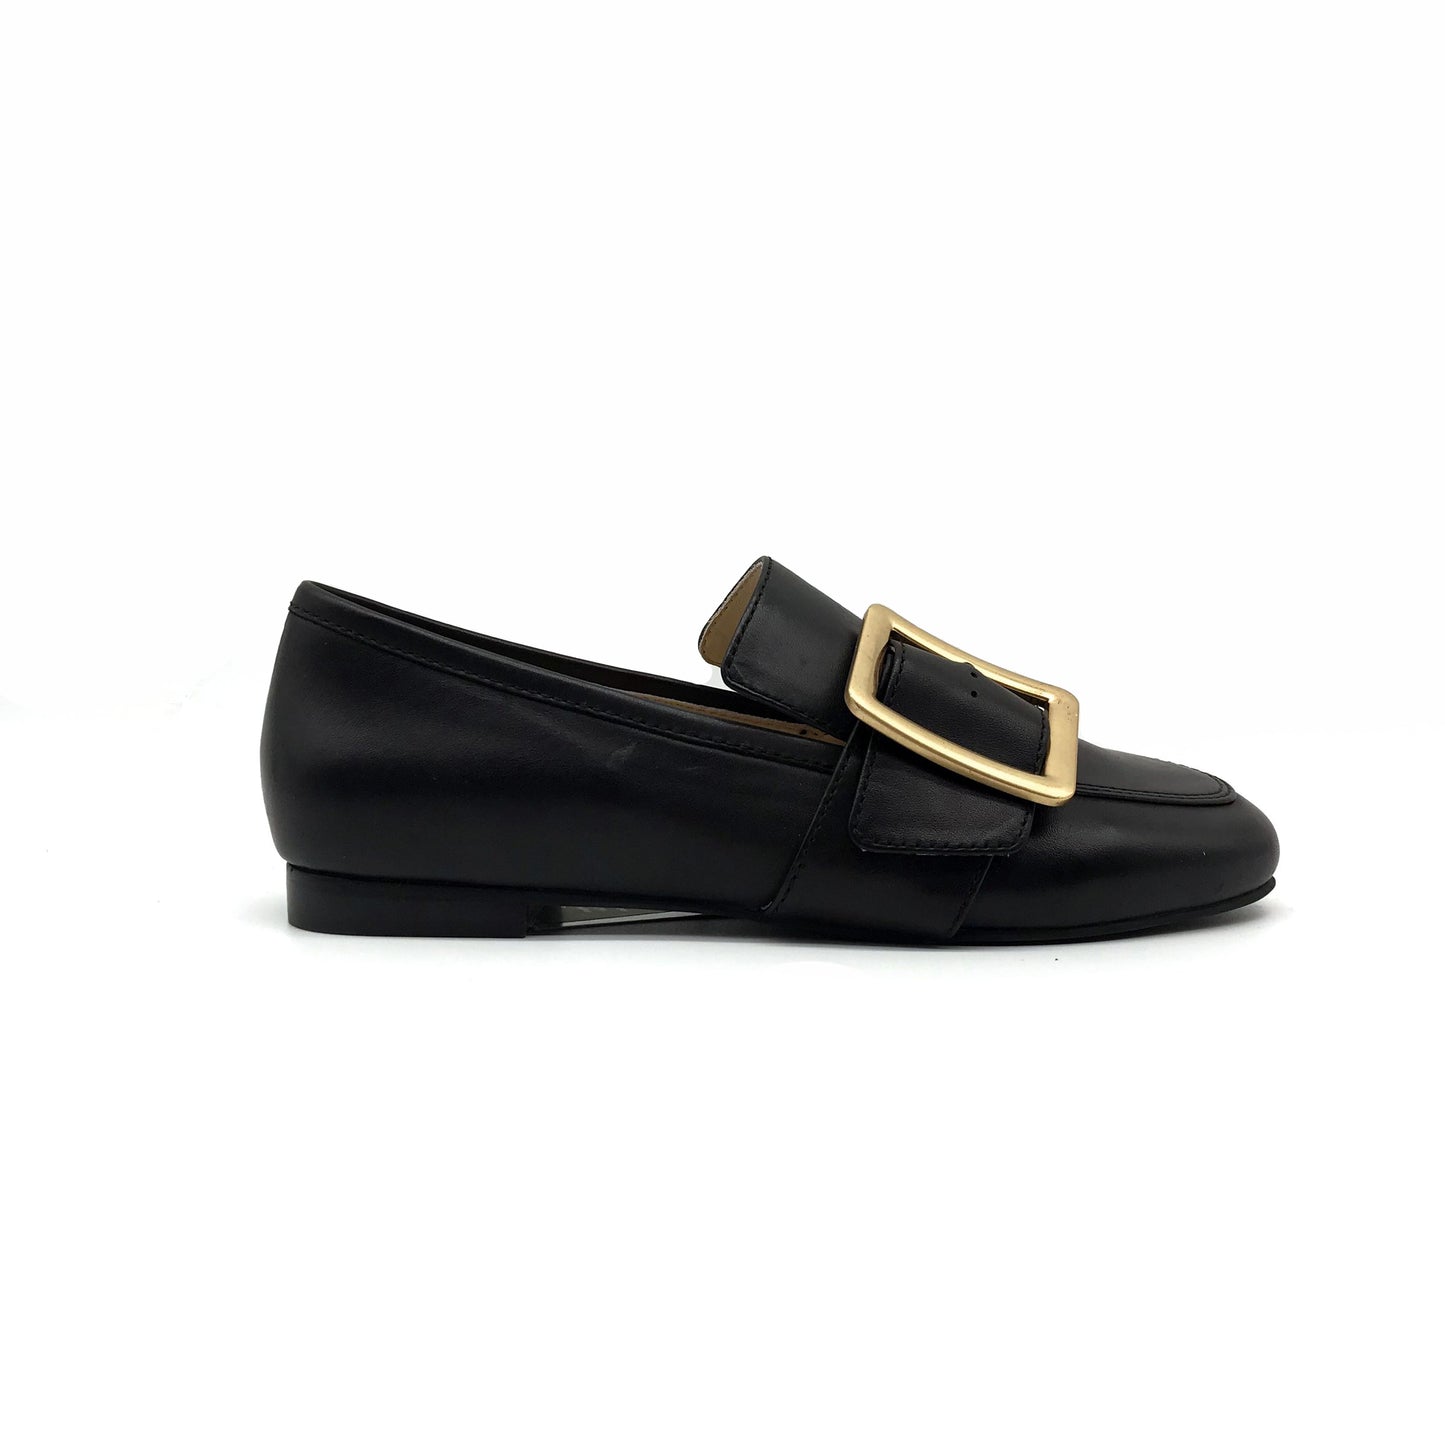 Comfortable Black Loafer Shoes with Arch Support and Orthotic Friendly, Suitable for Wide feet and Plantar Fasciitis